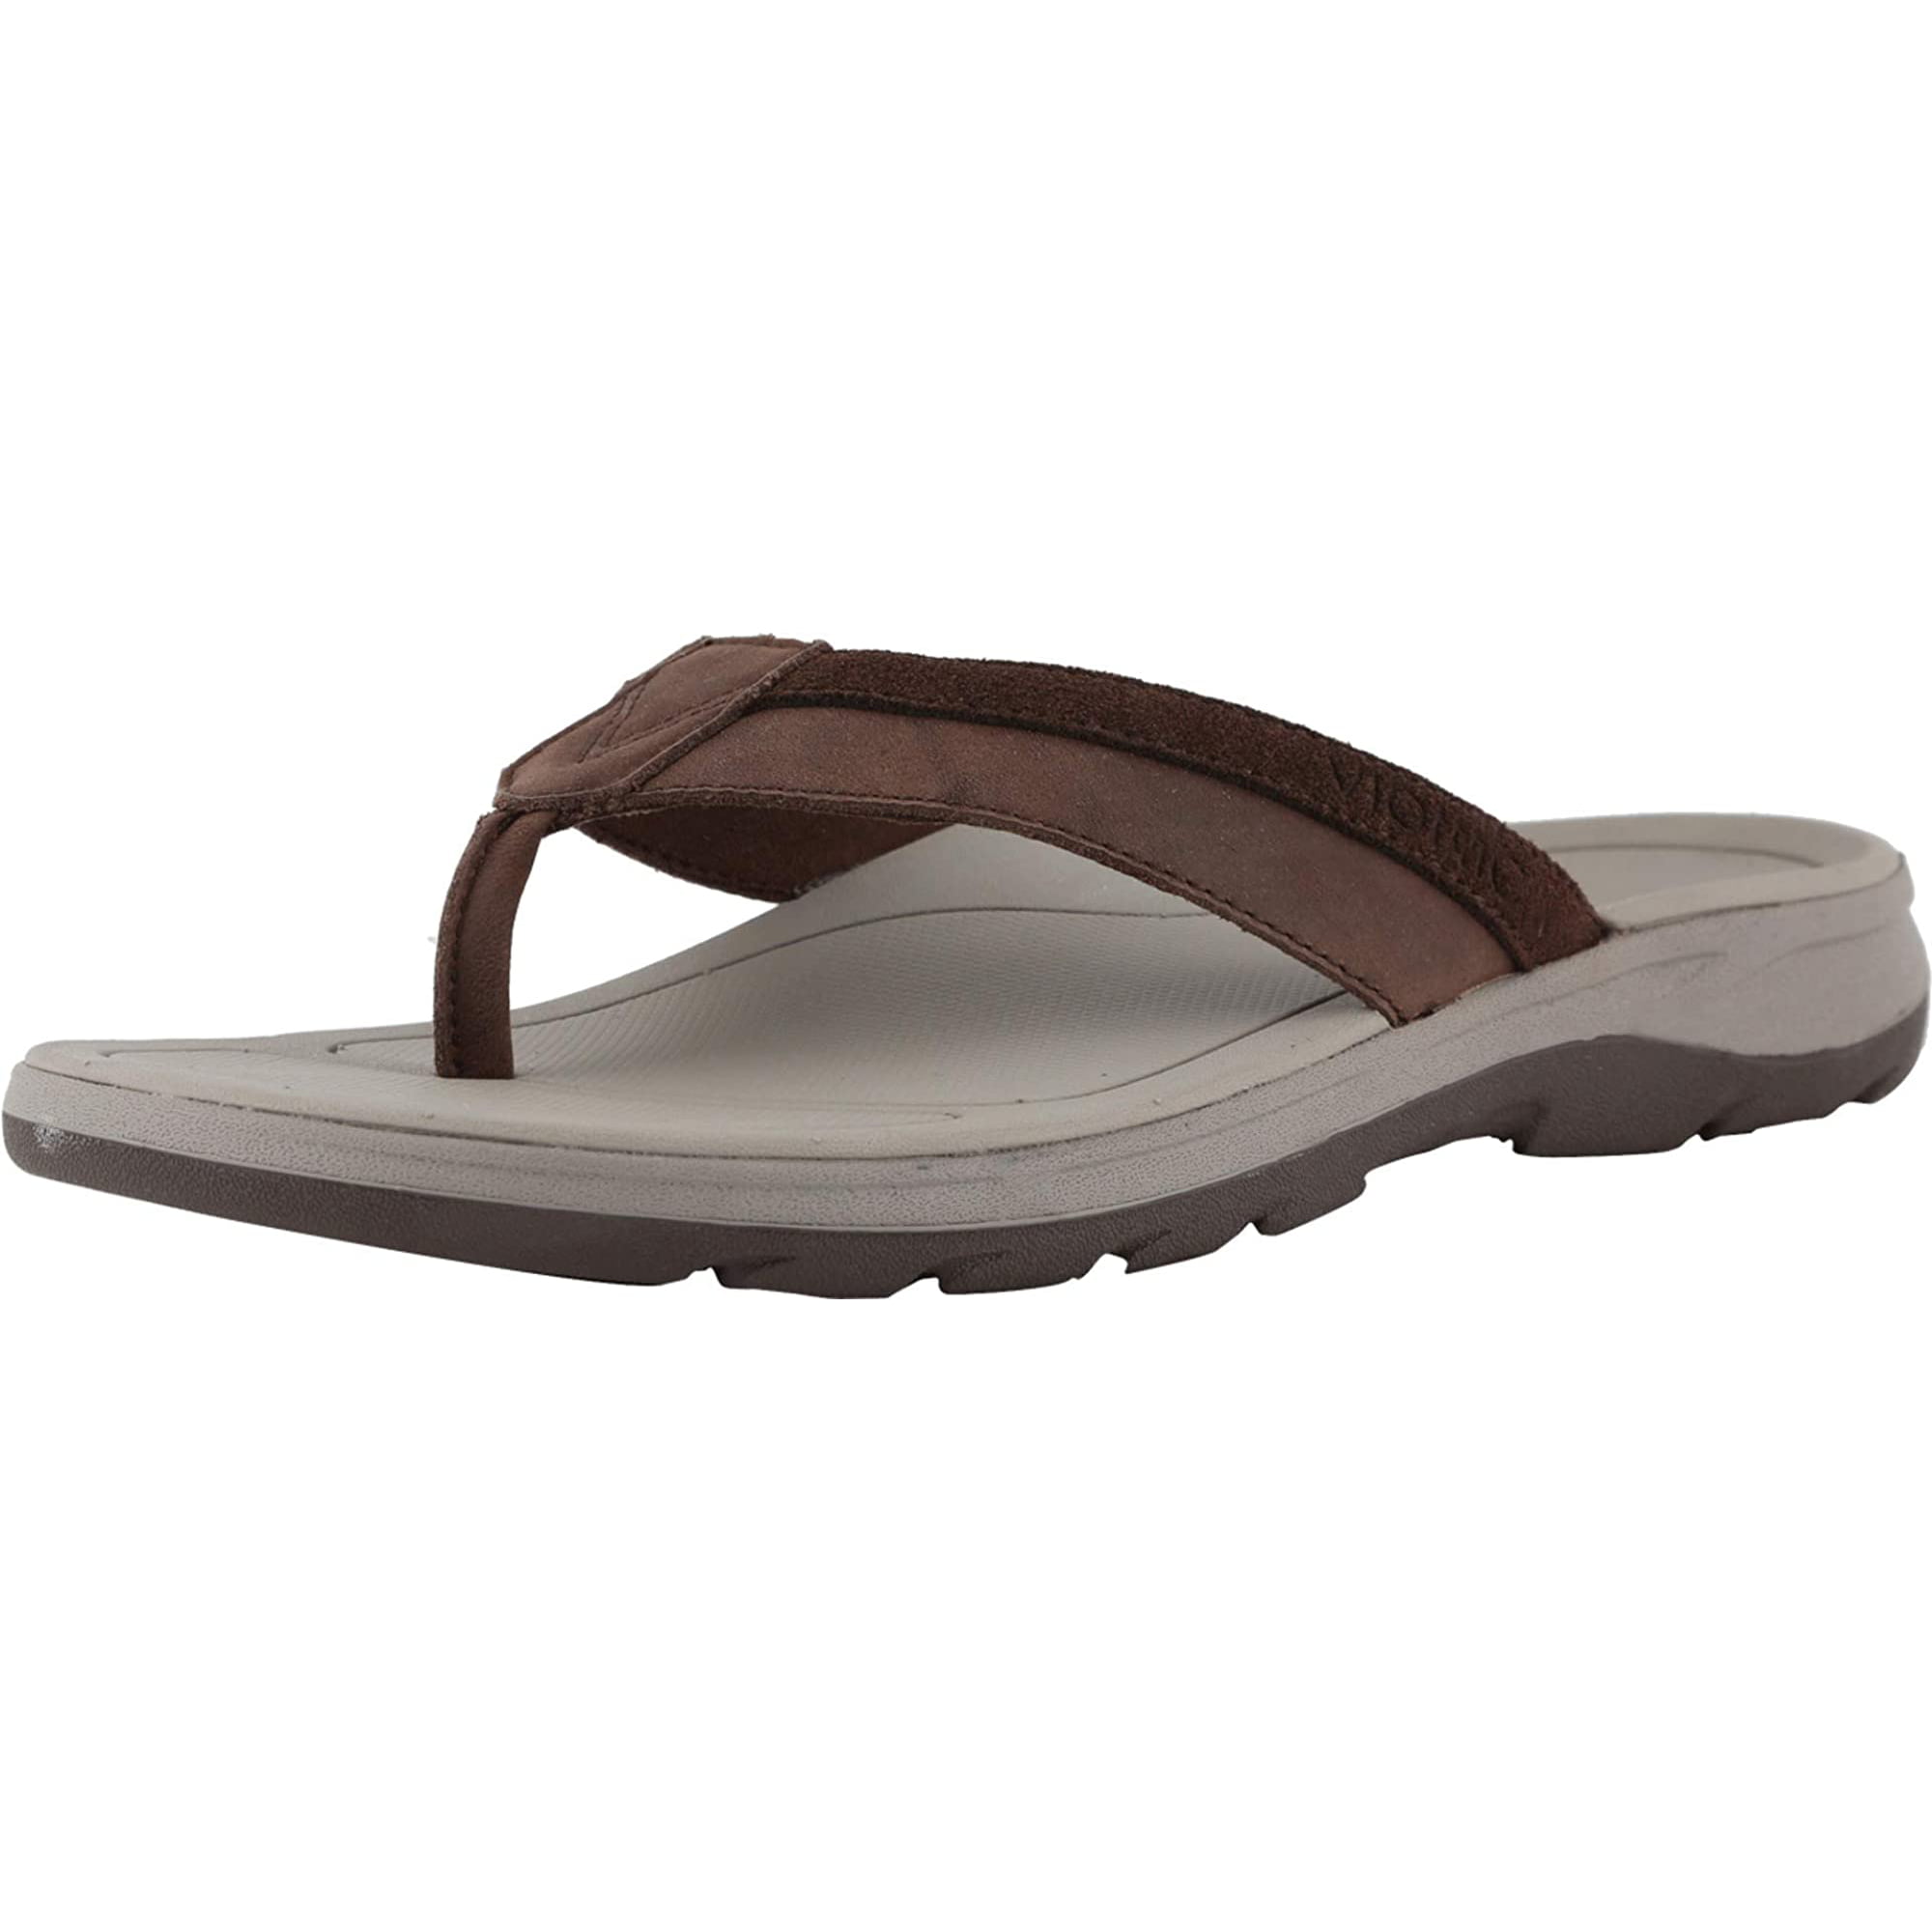 Vionic Canoe Dennis Toe-Post Sandal Mens Leather Flip-Flop with Concealed Orthotic Arch Support 